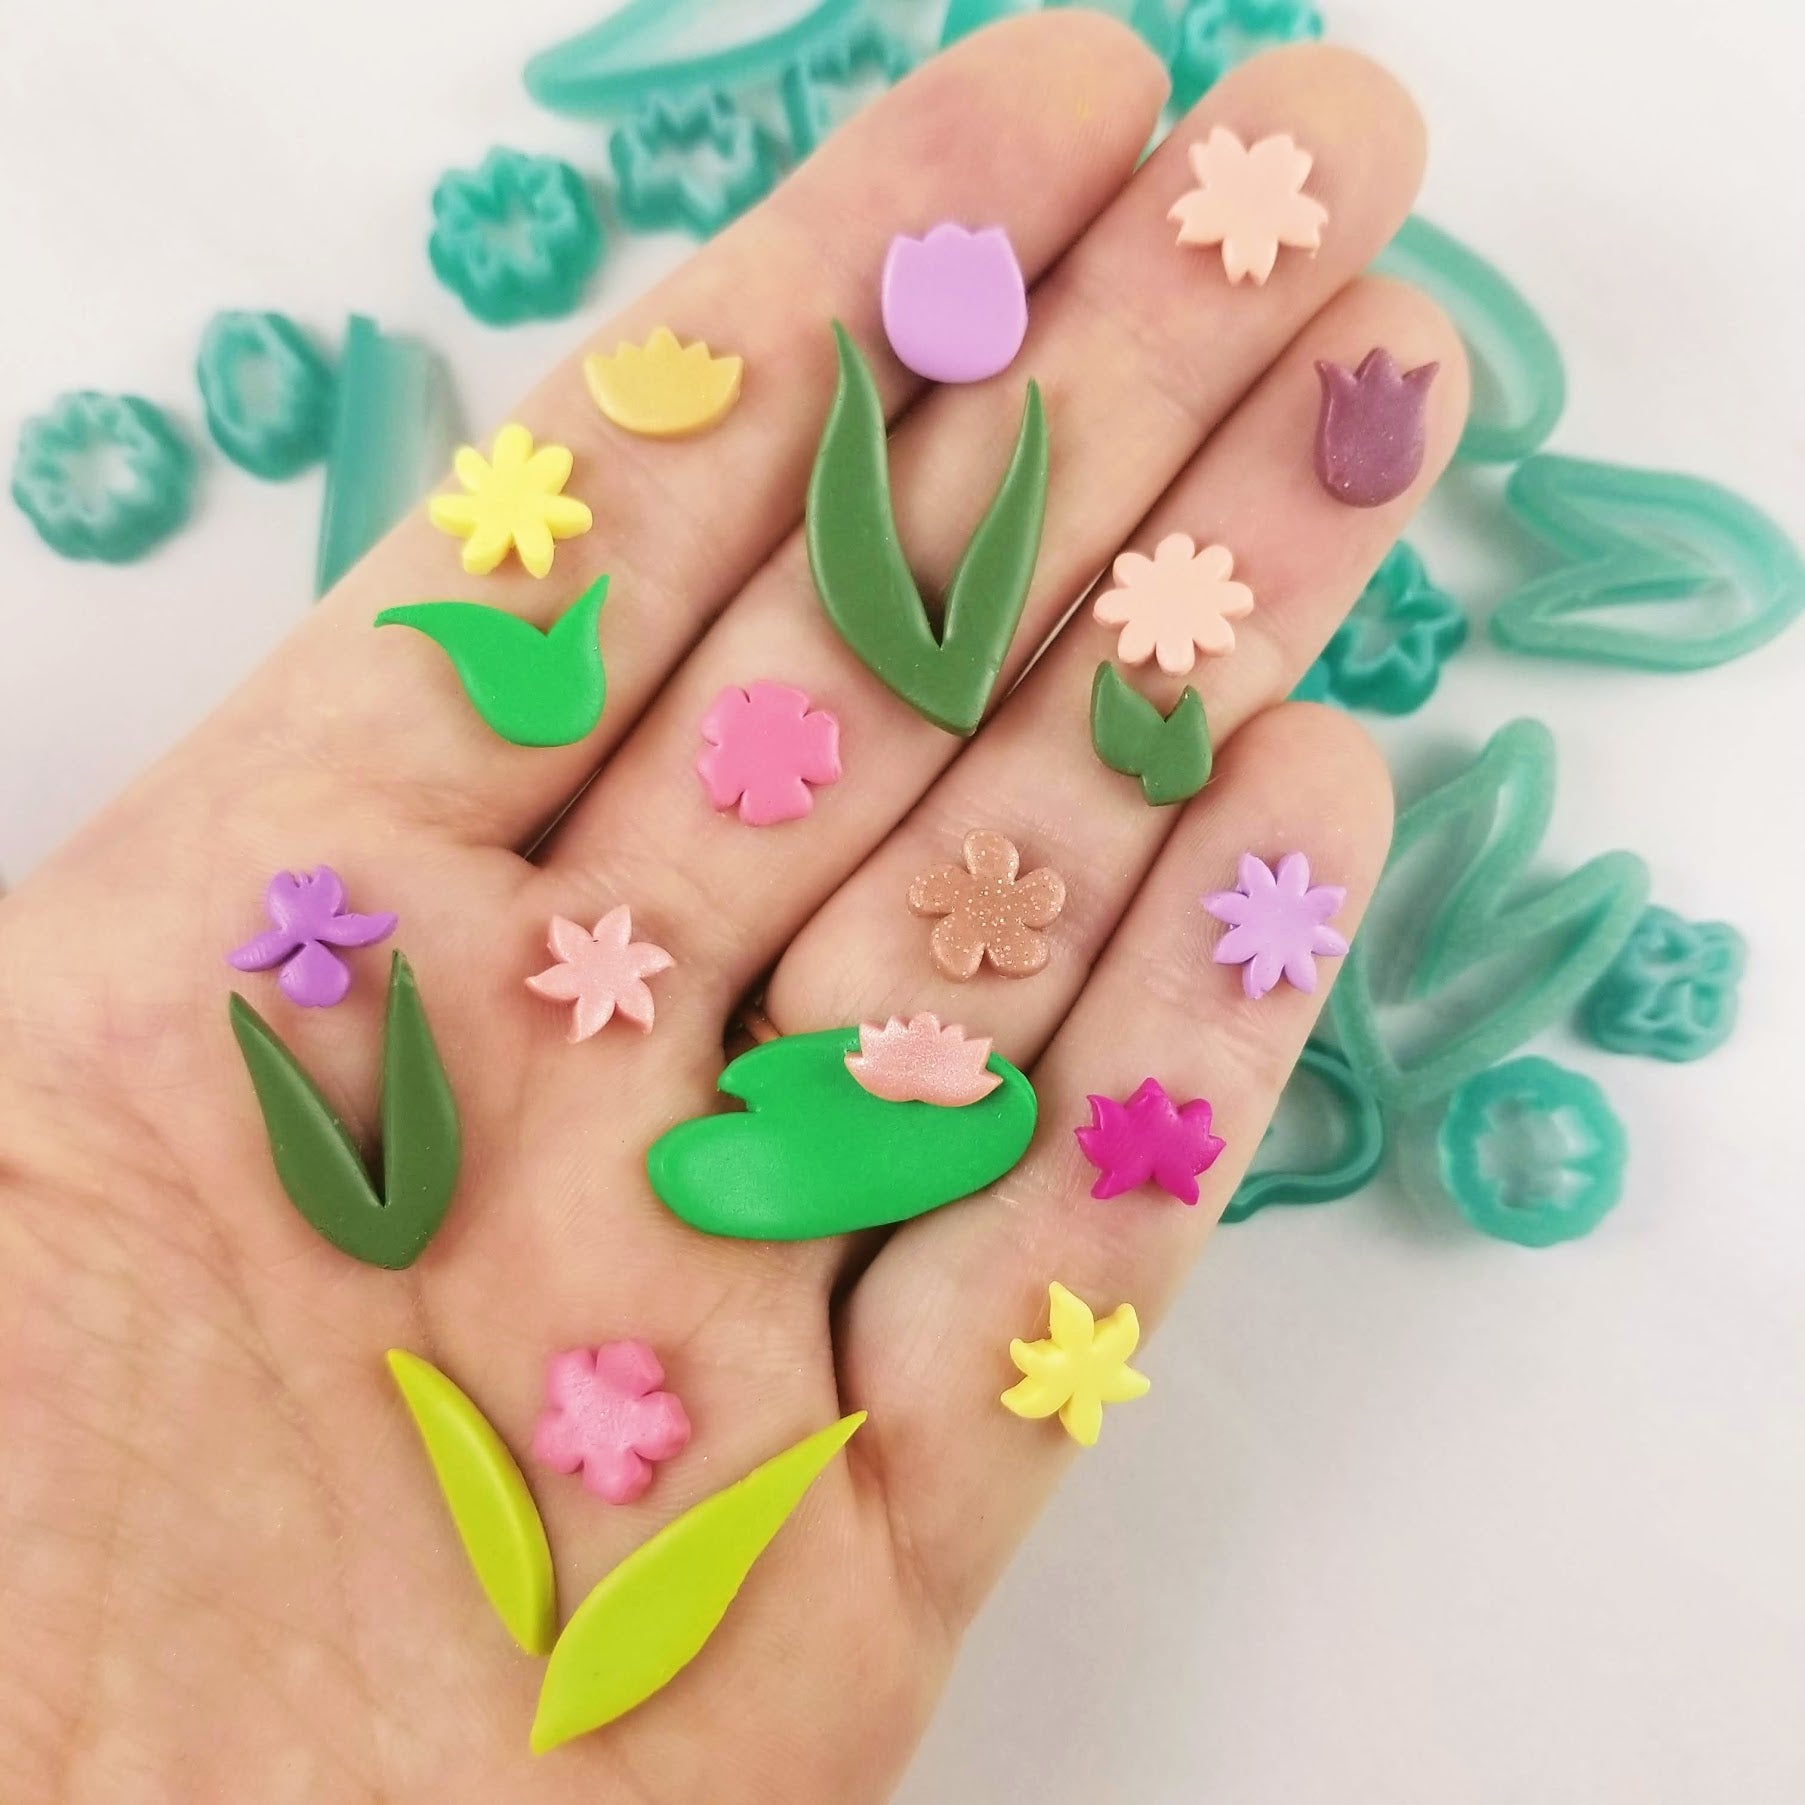 The Full Set includes 15 flowers (1 cm) and 7 leaf/leaves cutters (1-2.5 cm). In photo sample finish product on polymer clay